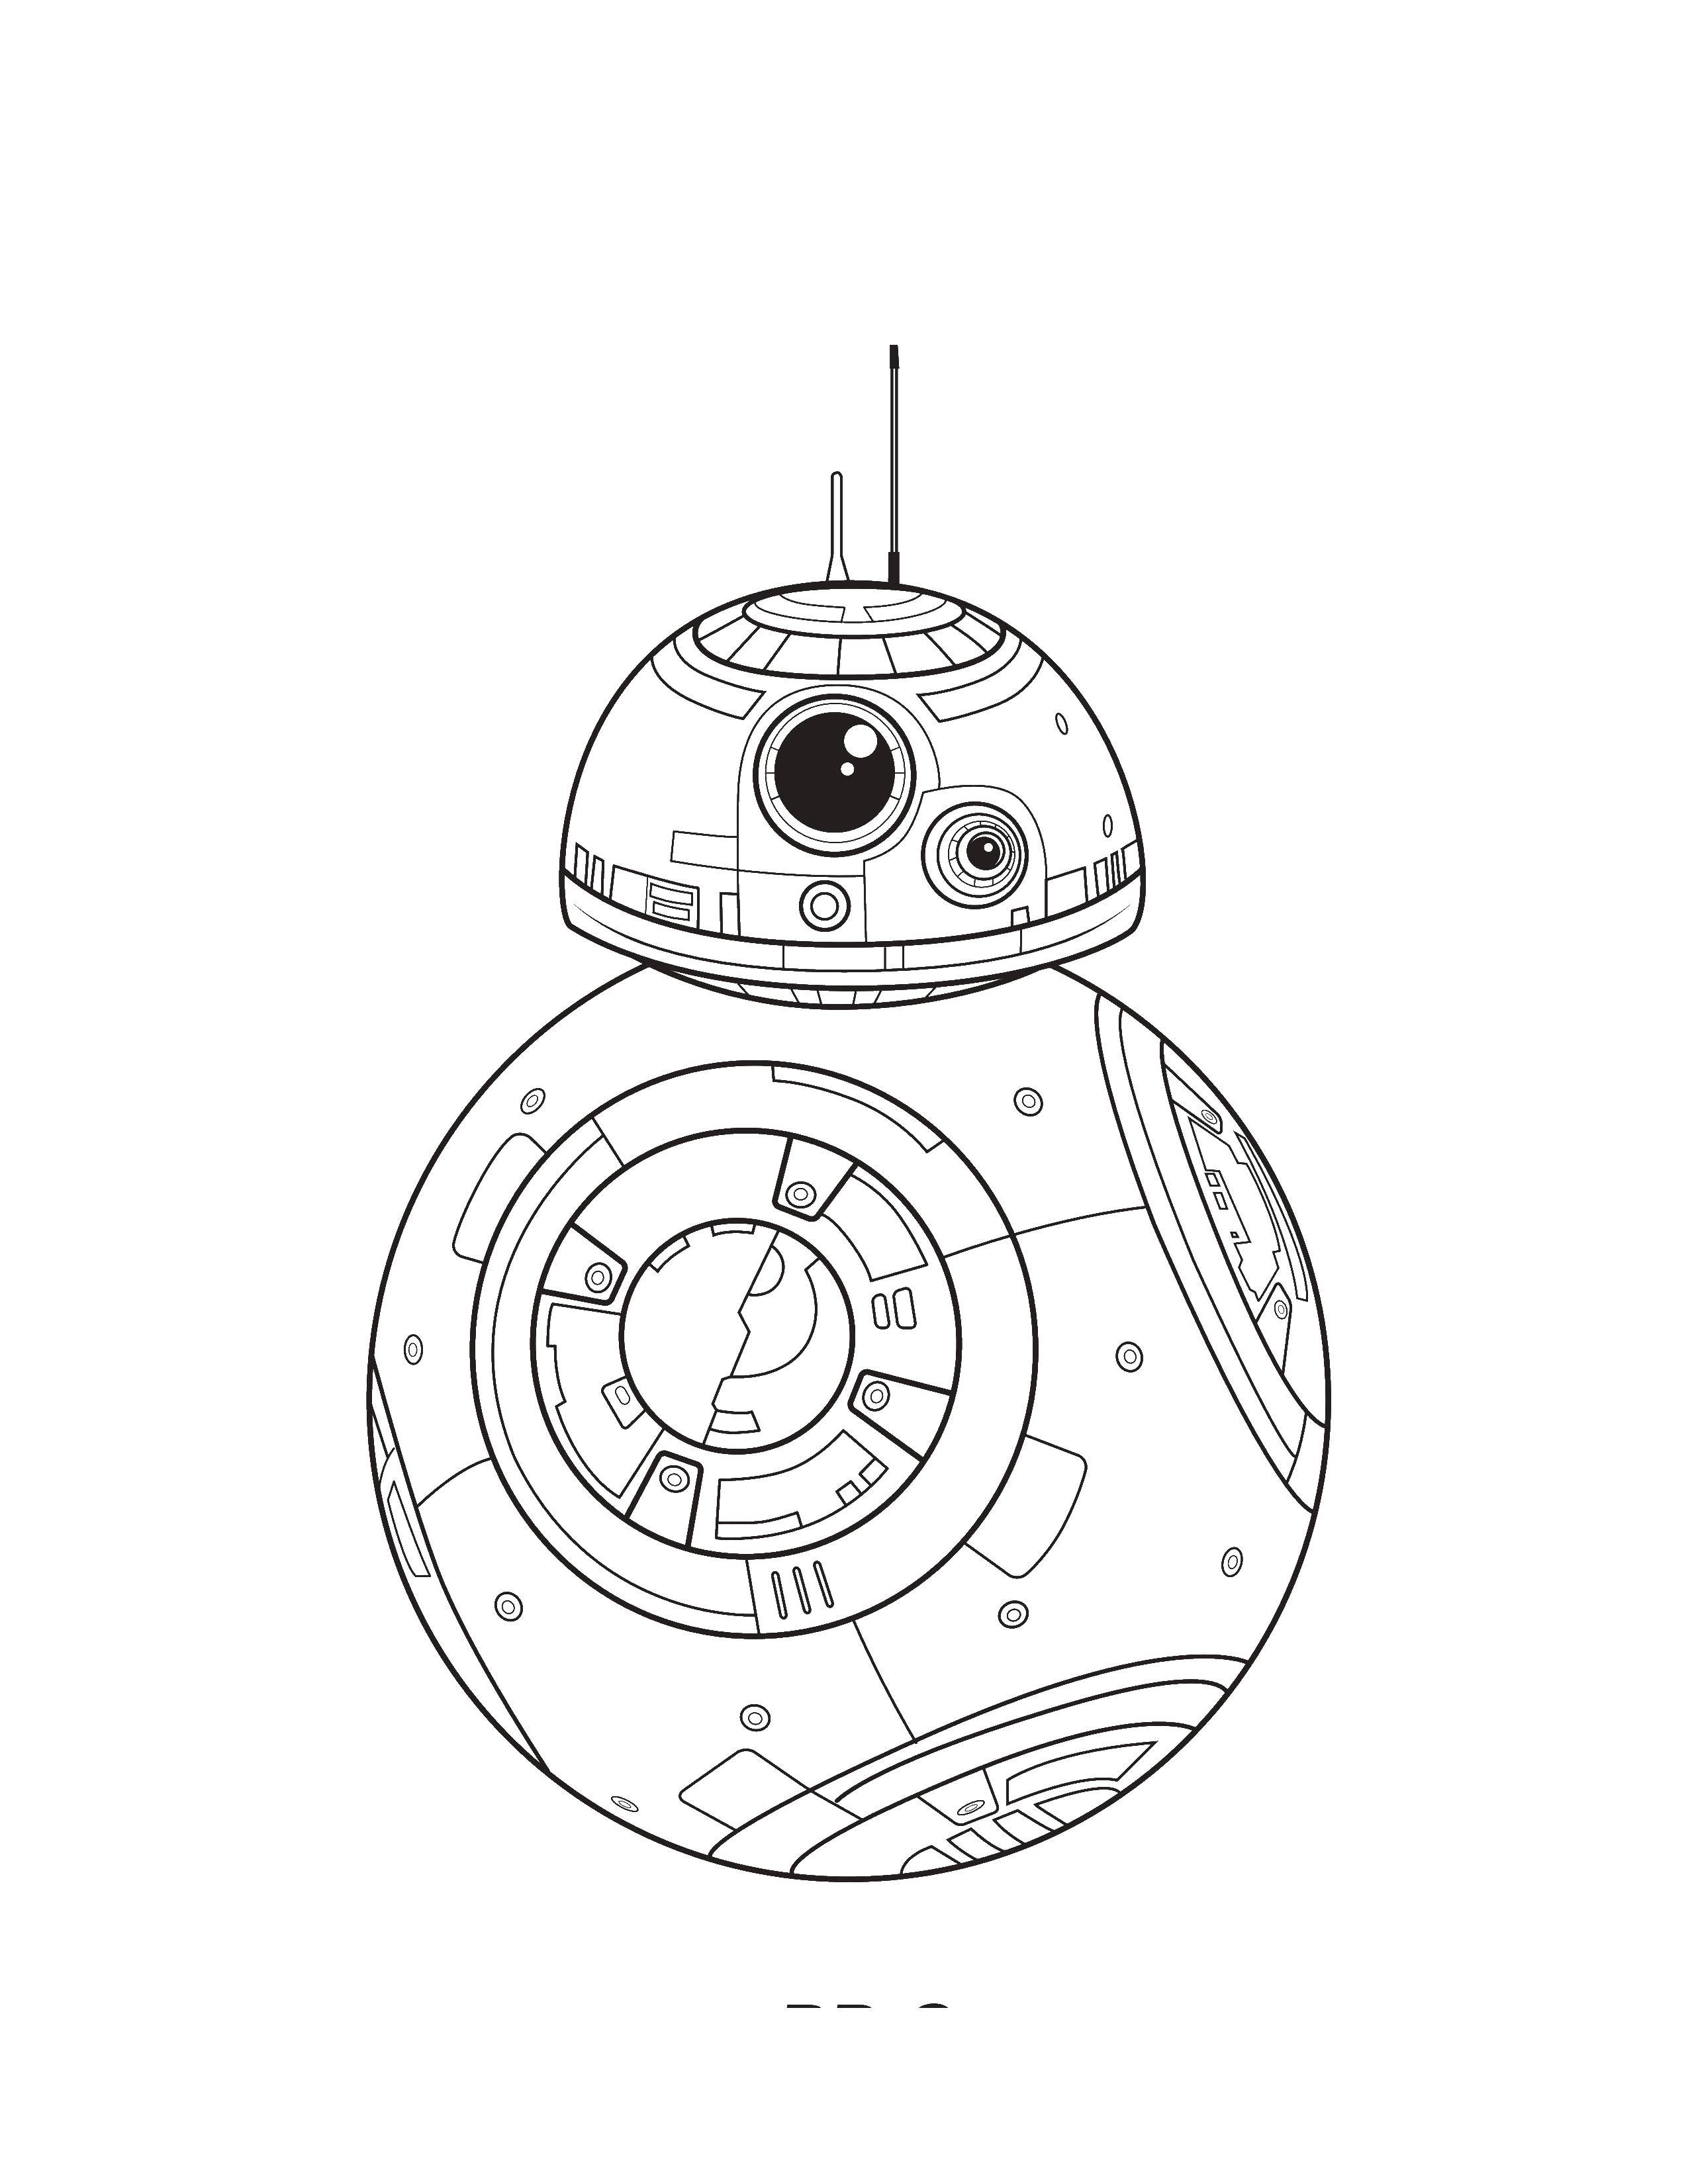 Coloring R8. Category star wars . Tags:  R8.